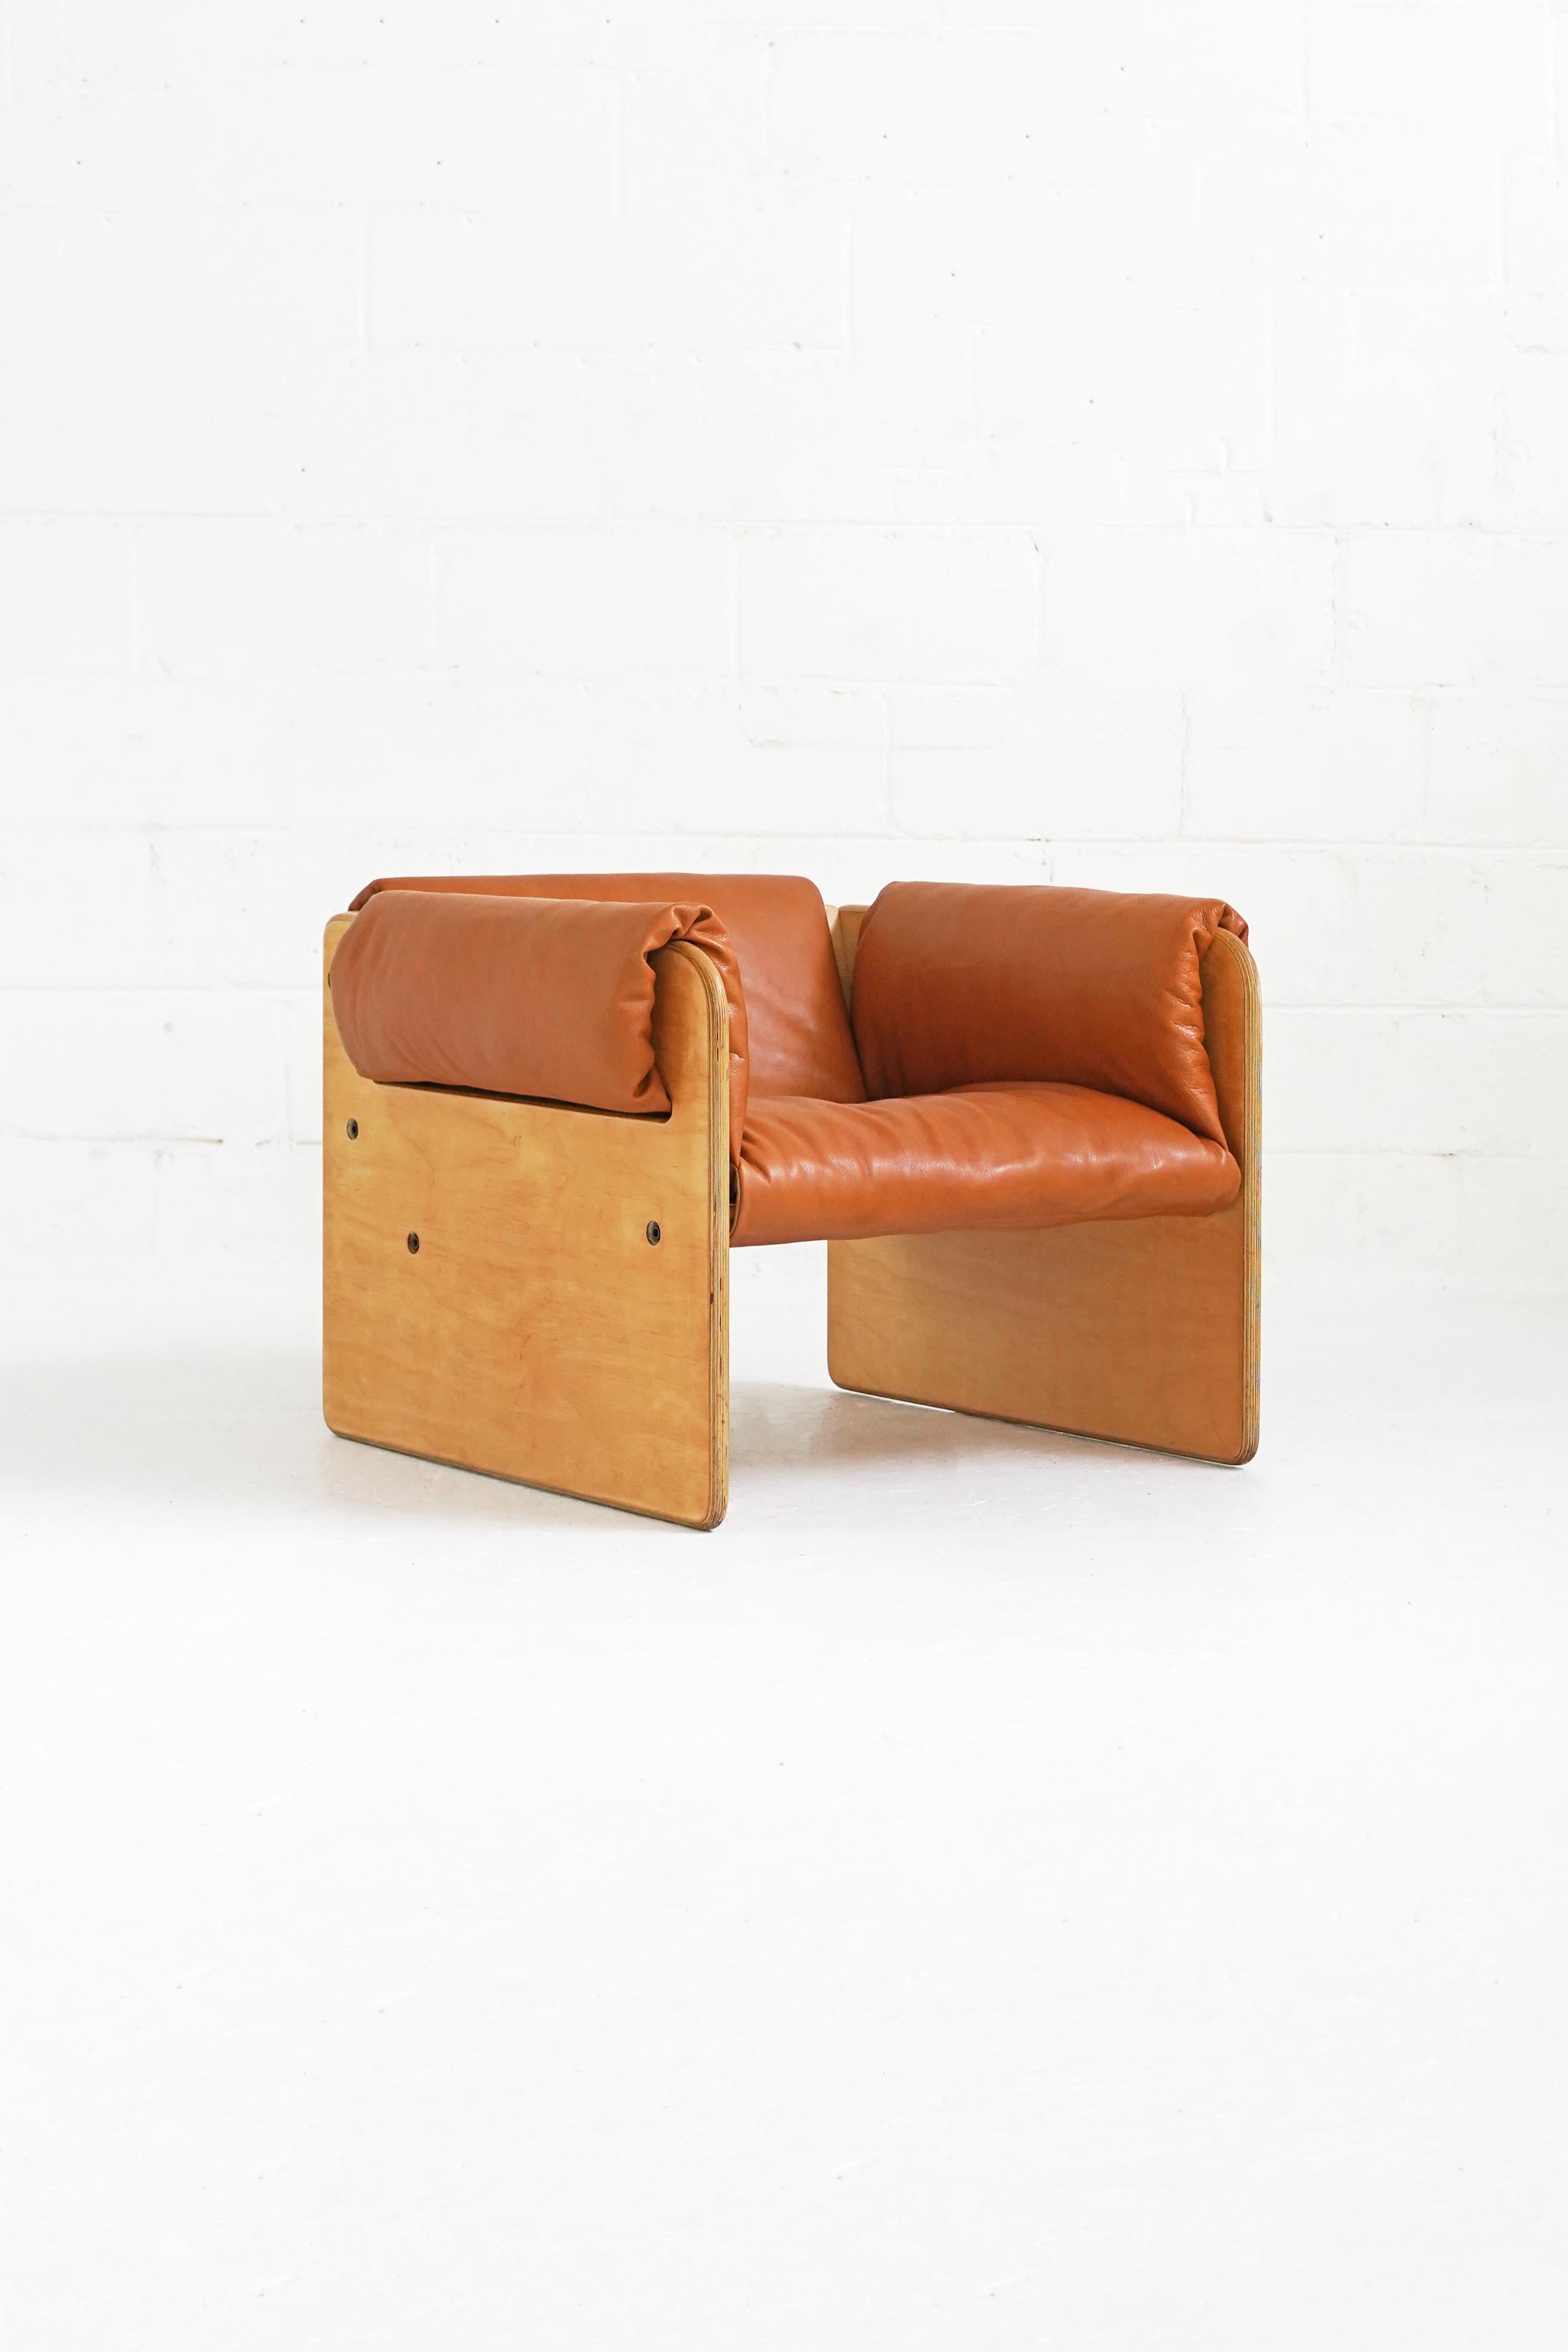 Very rare Canadian-designed chair, built and designed for notable locations across Canada, including but not limited to the Bata Library, Ontario and commissioned for several projects by Architect A.J. Diamond. Fully reupholstered in